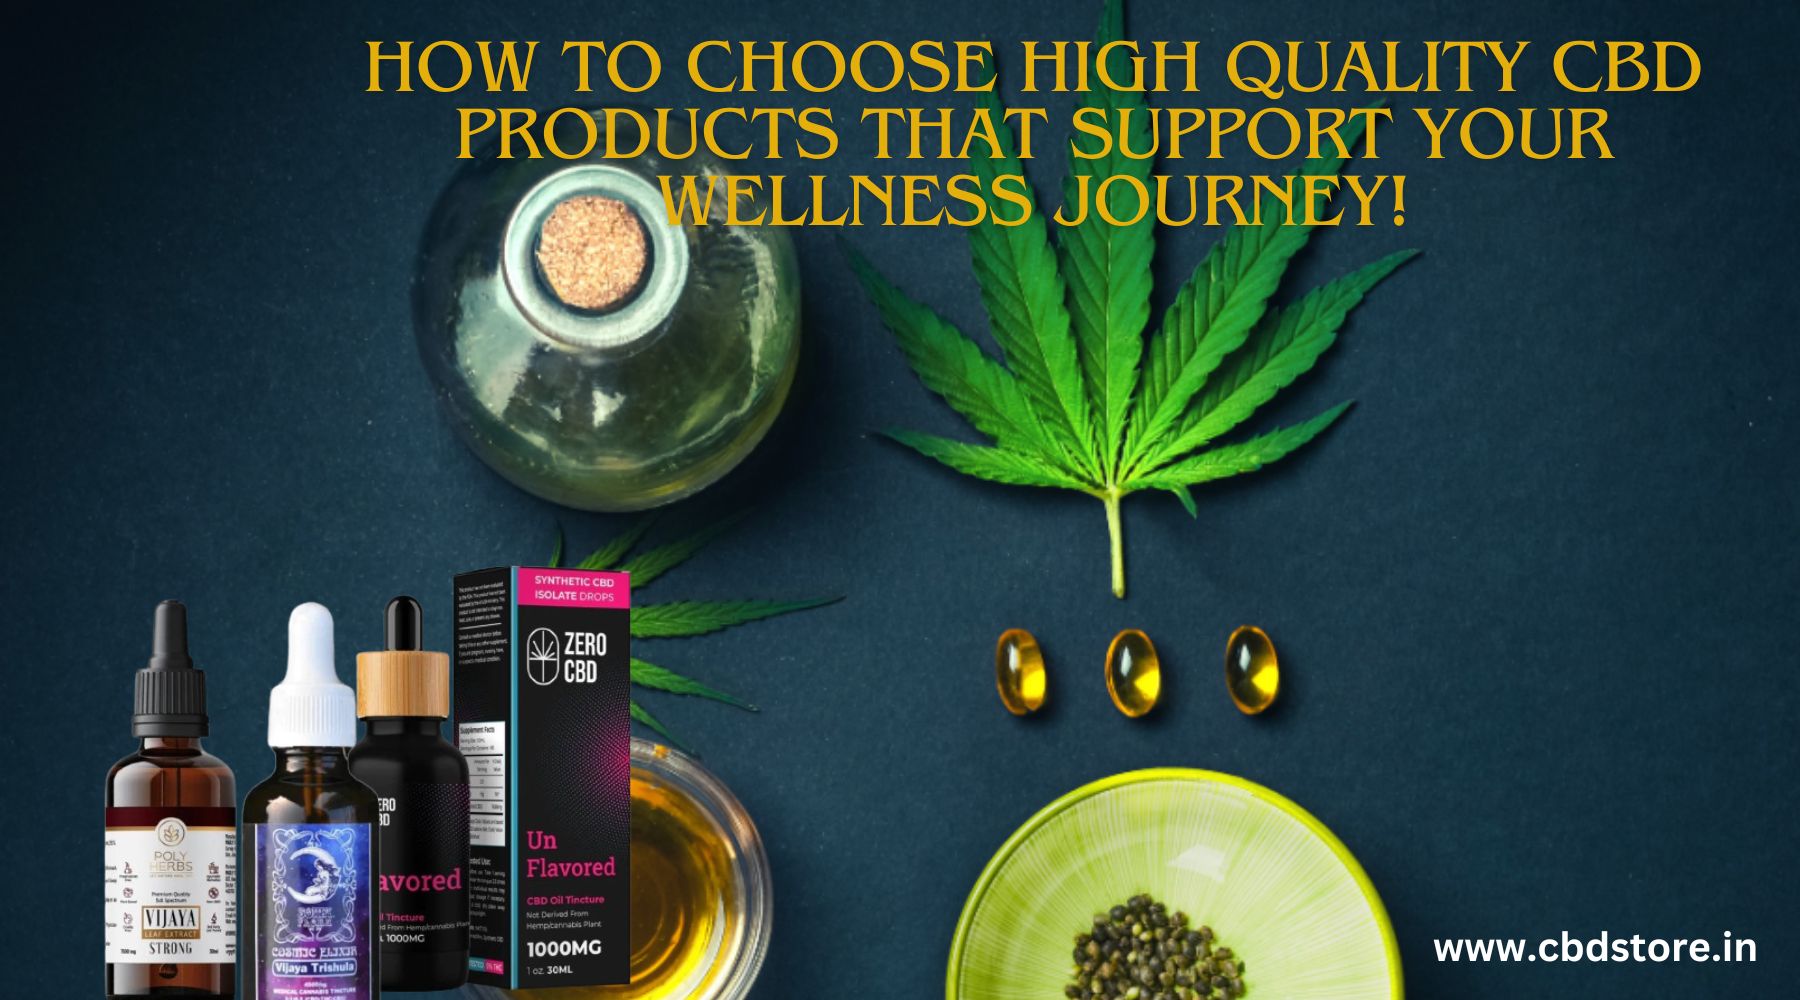 How to choose high quality CBD products that support your wellness journey!